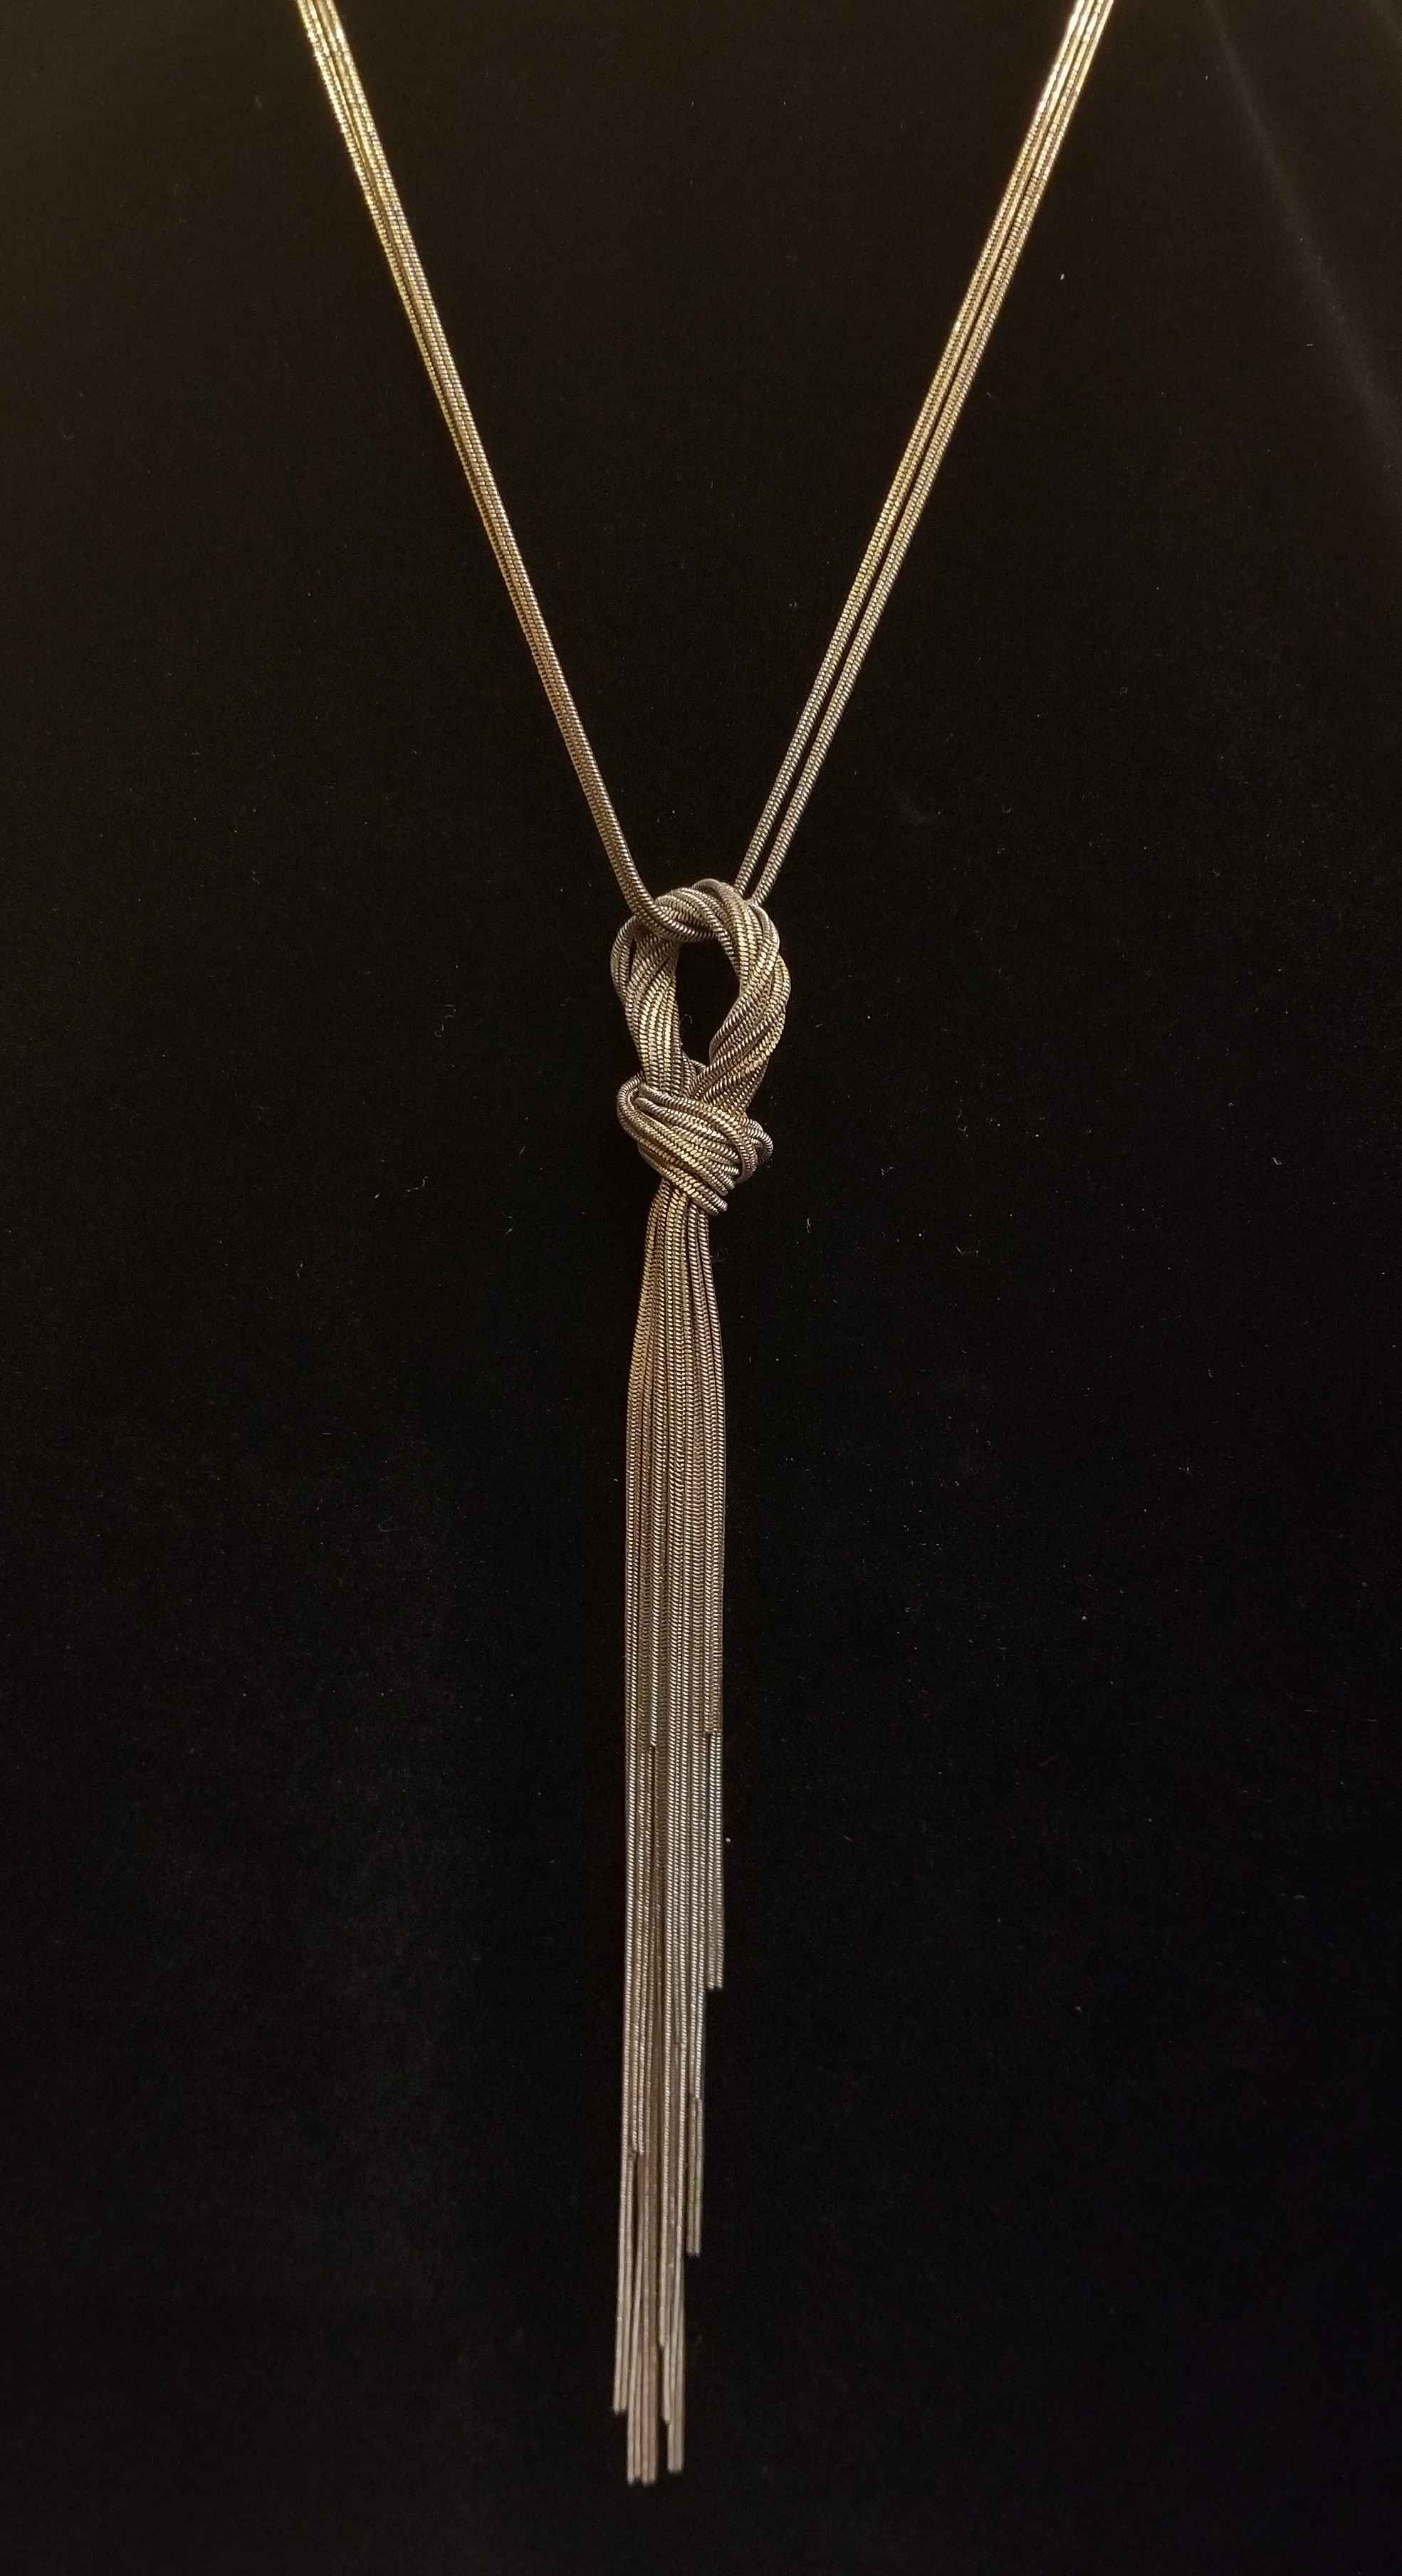 Necklace - Chain Knot by  Gallery Pieces - Masterpiece Online